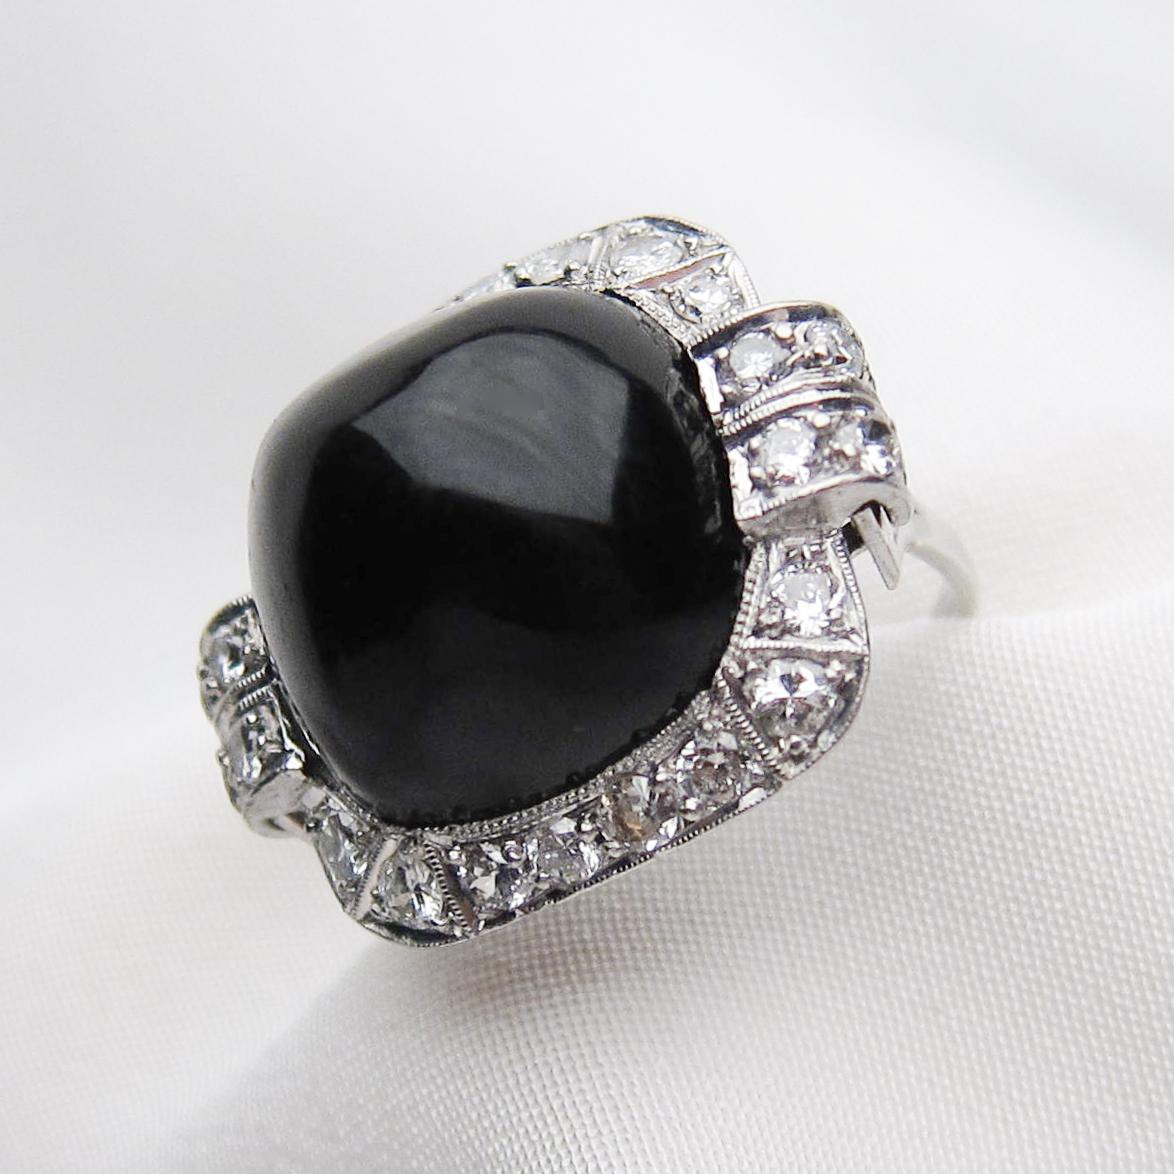 Circa 1930. This fantastic platinum Deco ring features a stunning 14.9 carat sugarloaf natural onyx cabochon surrounded with diamonds. The 24 bead-set, round brilliant-cut diamonds weigh .79 carats with an SI2-I1 clarity and F-G color. The side